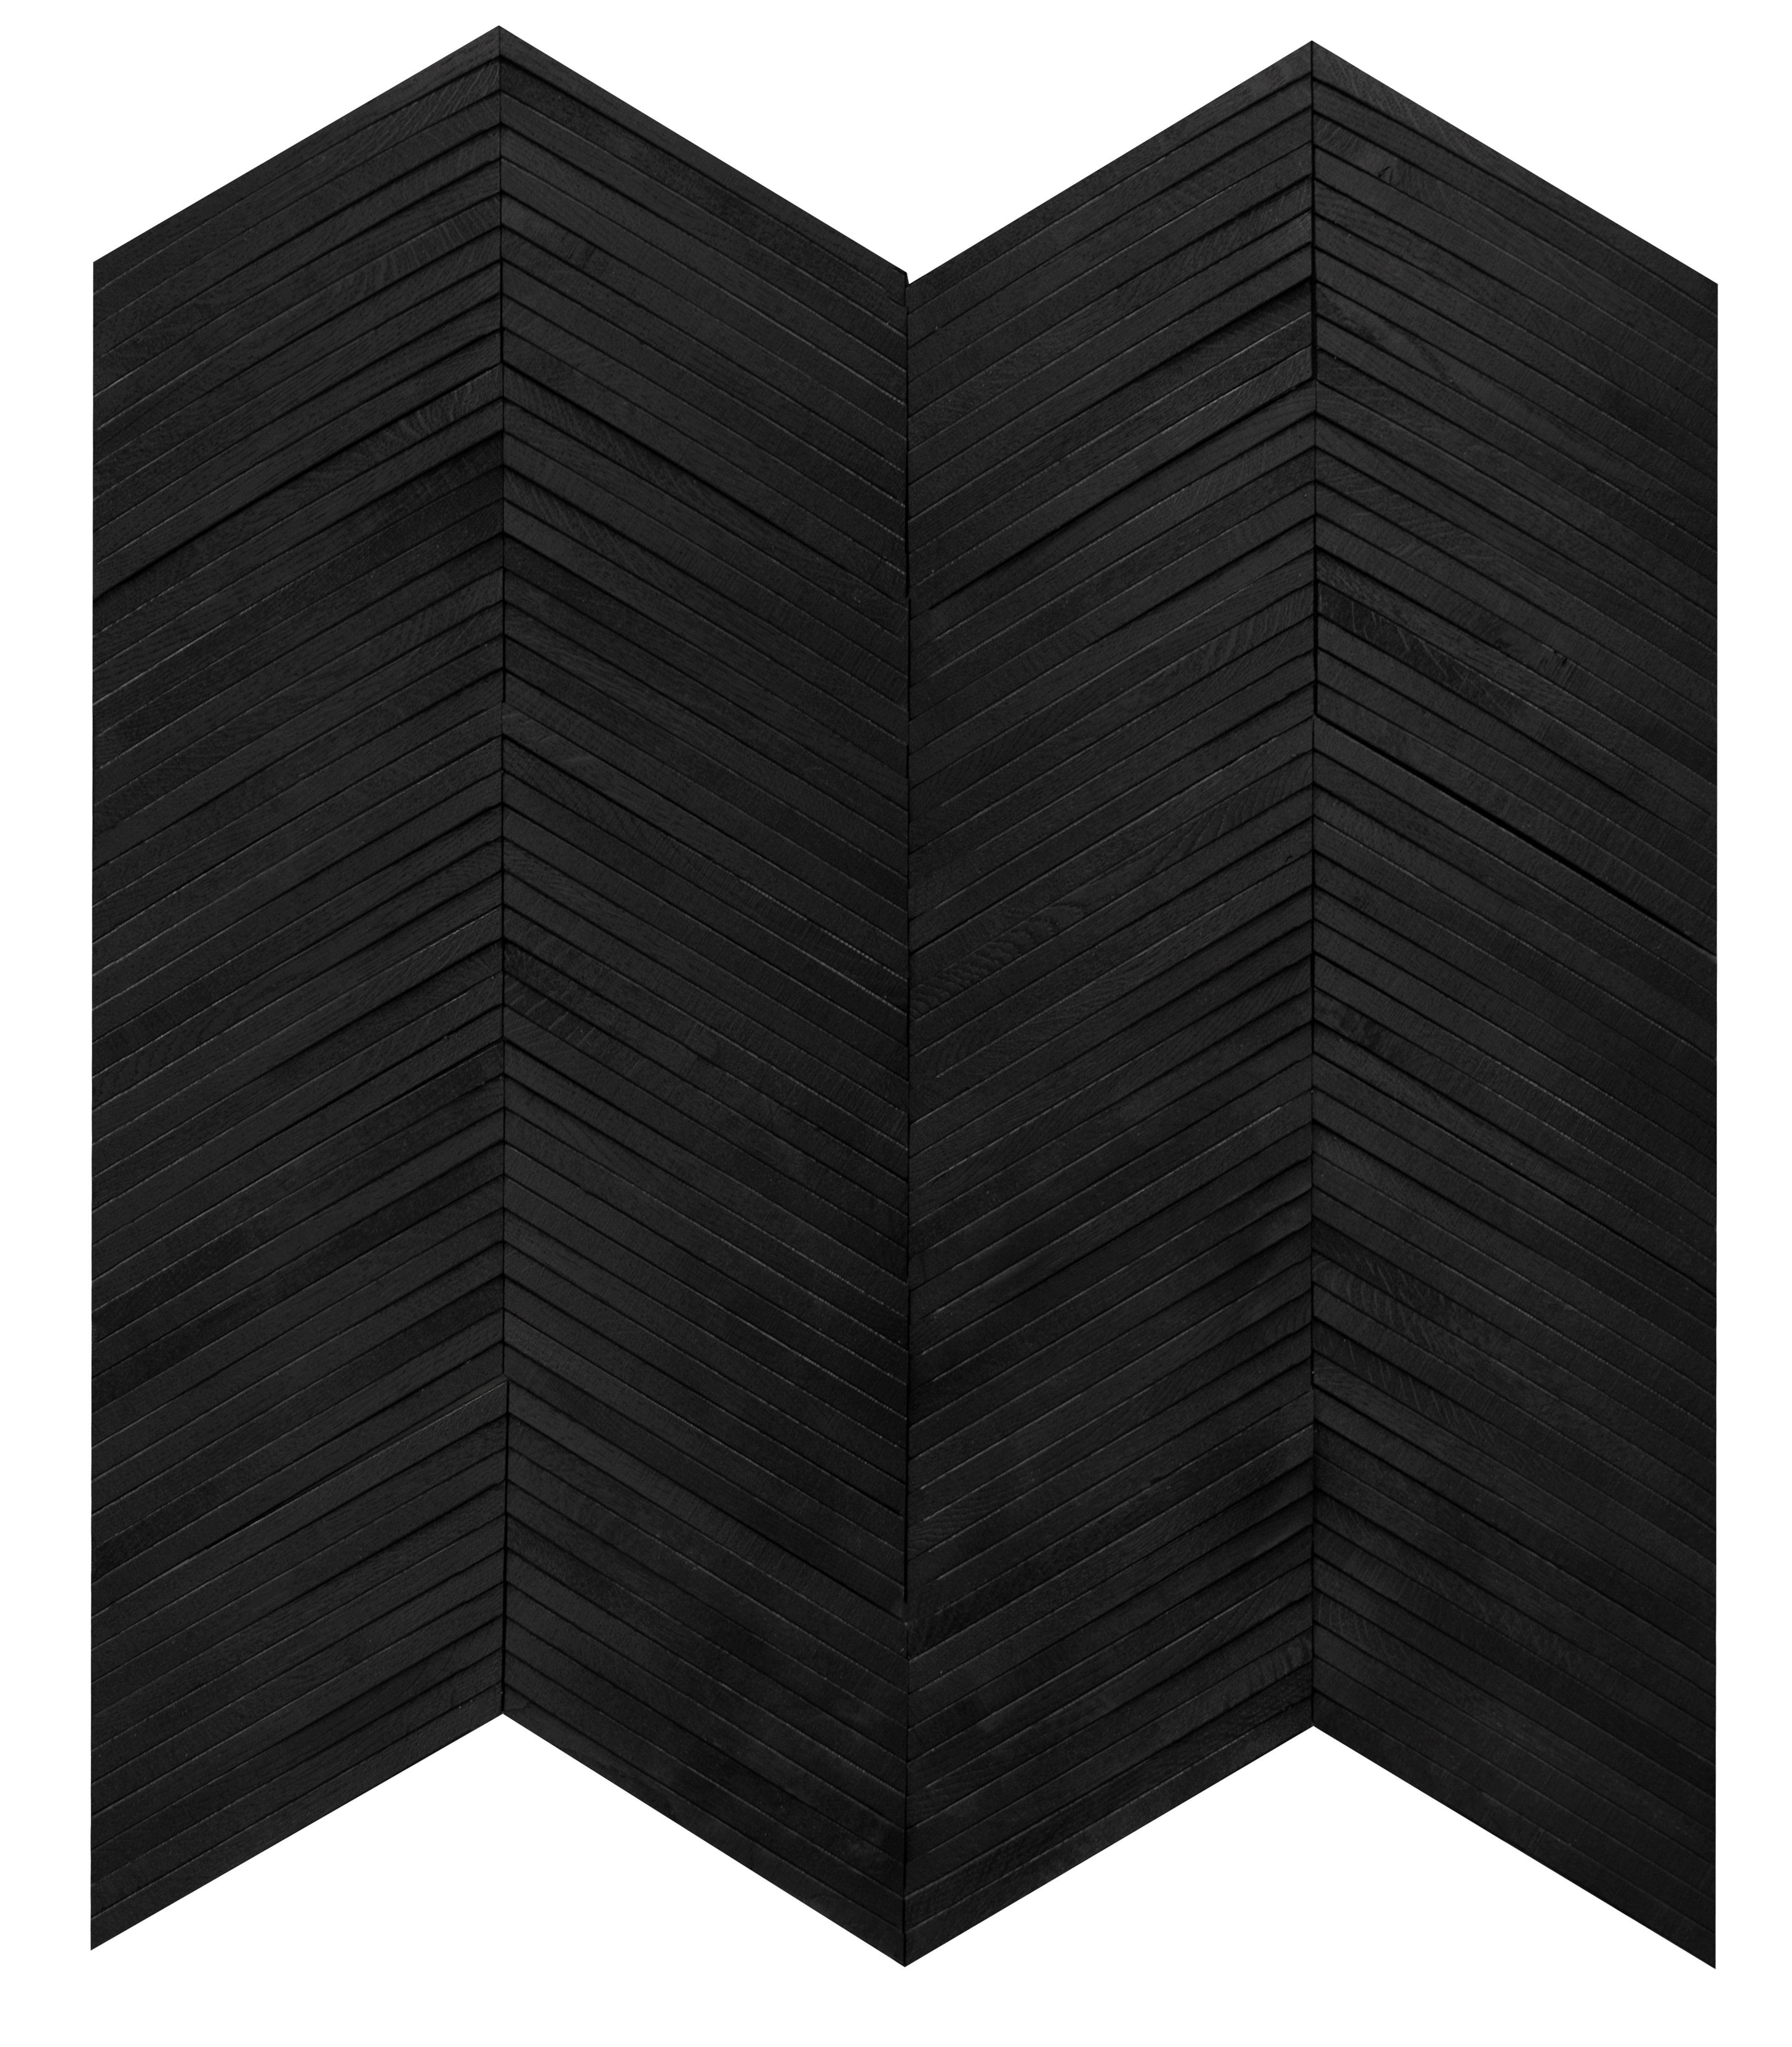 duchateau inceptiv ark chevron noir oak three dimensional wall natural wood panel lacquer for interior use distributed by surface group international